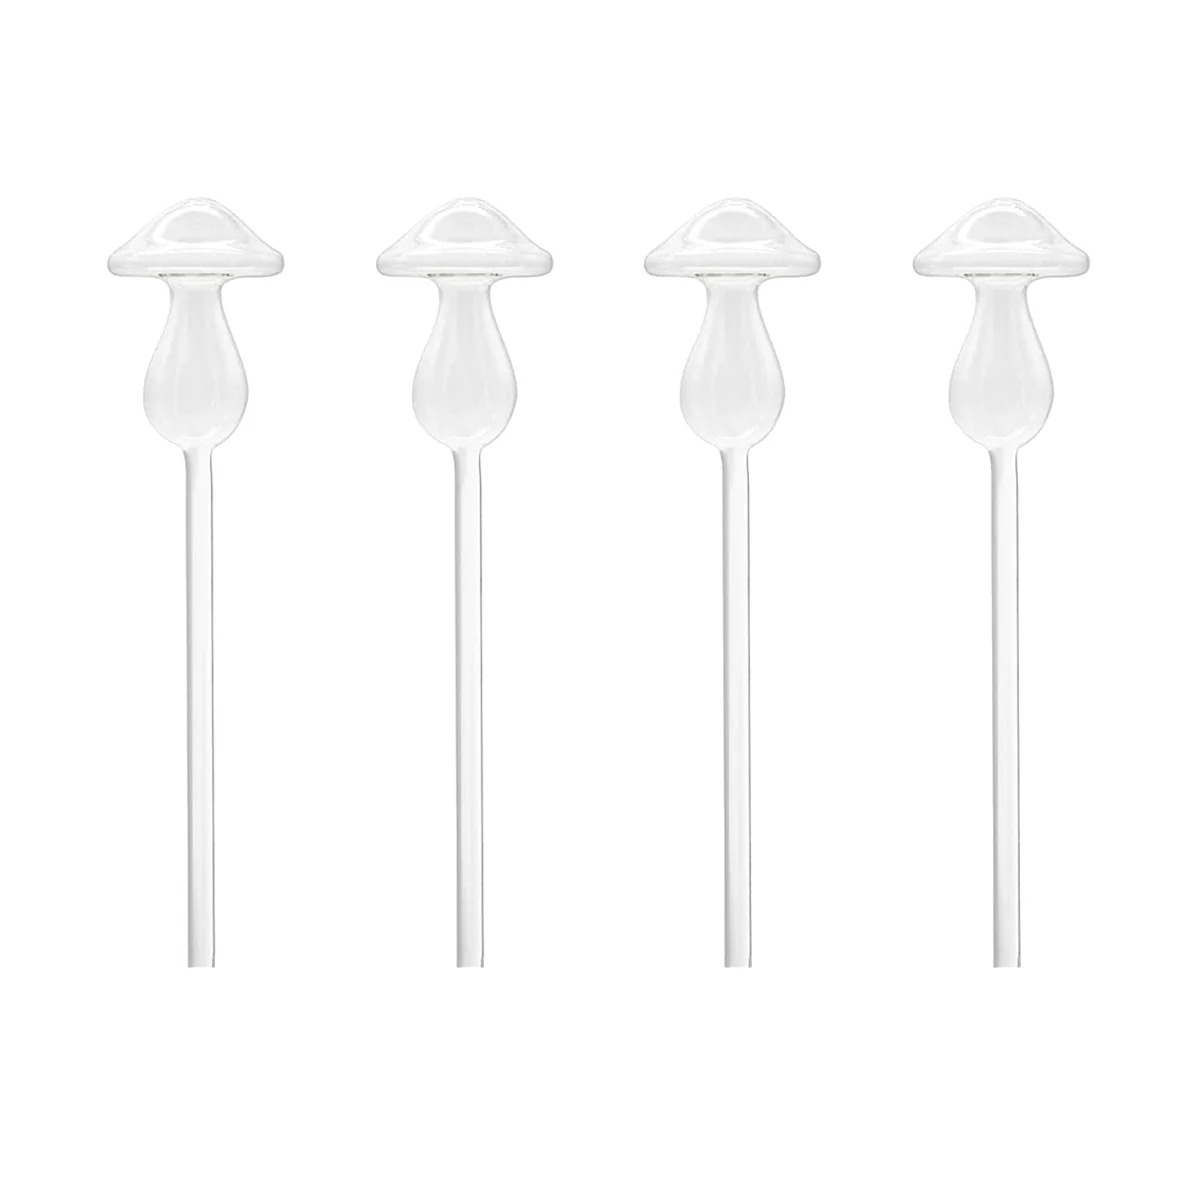 

4Pcs Plant Watering Globes, Hand Blown Clear Glass Self Watering Planter Insert Mushroom Watering Globes